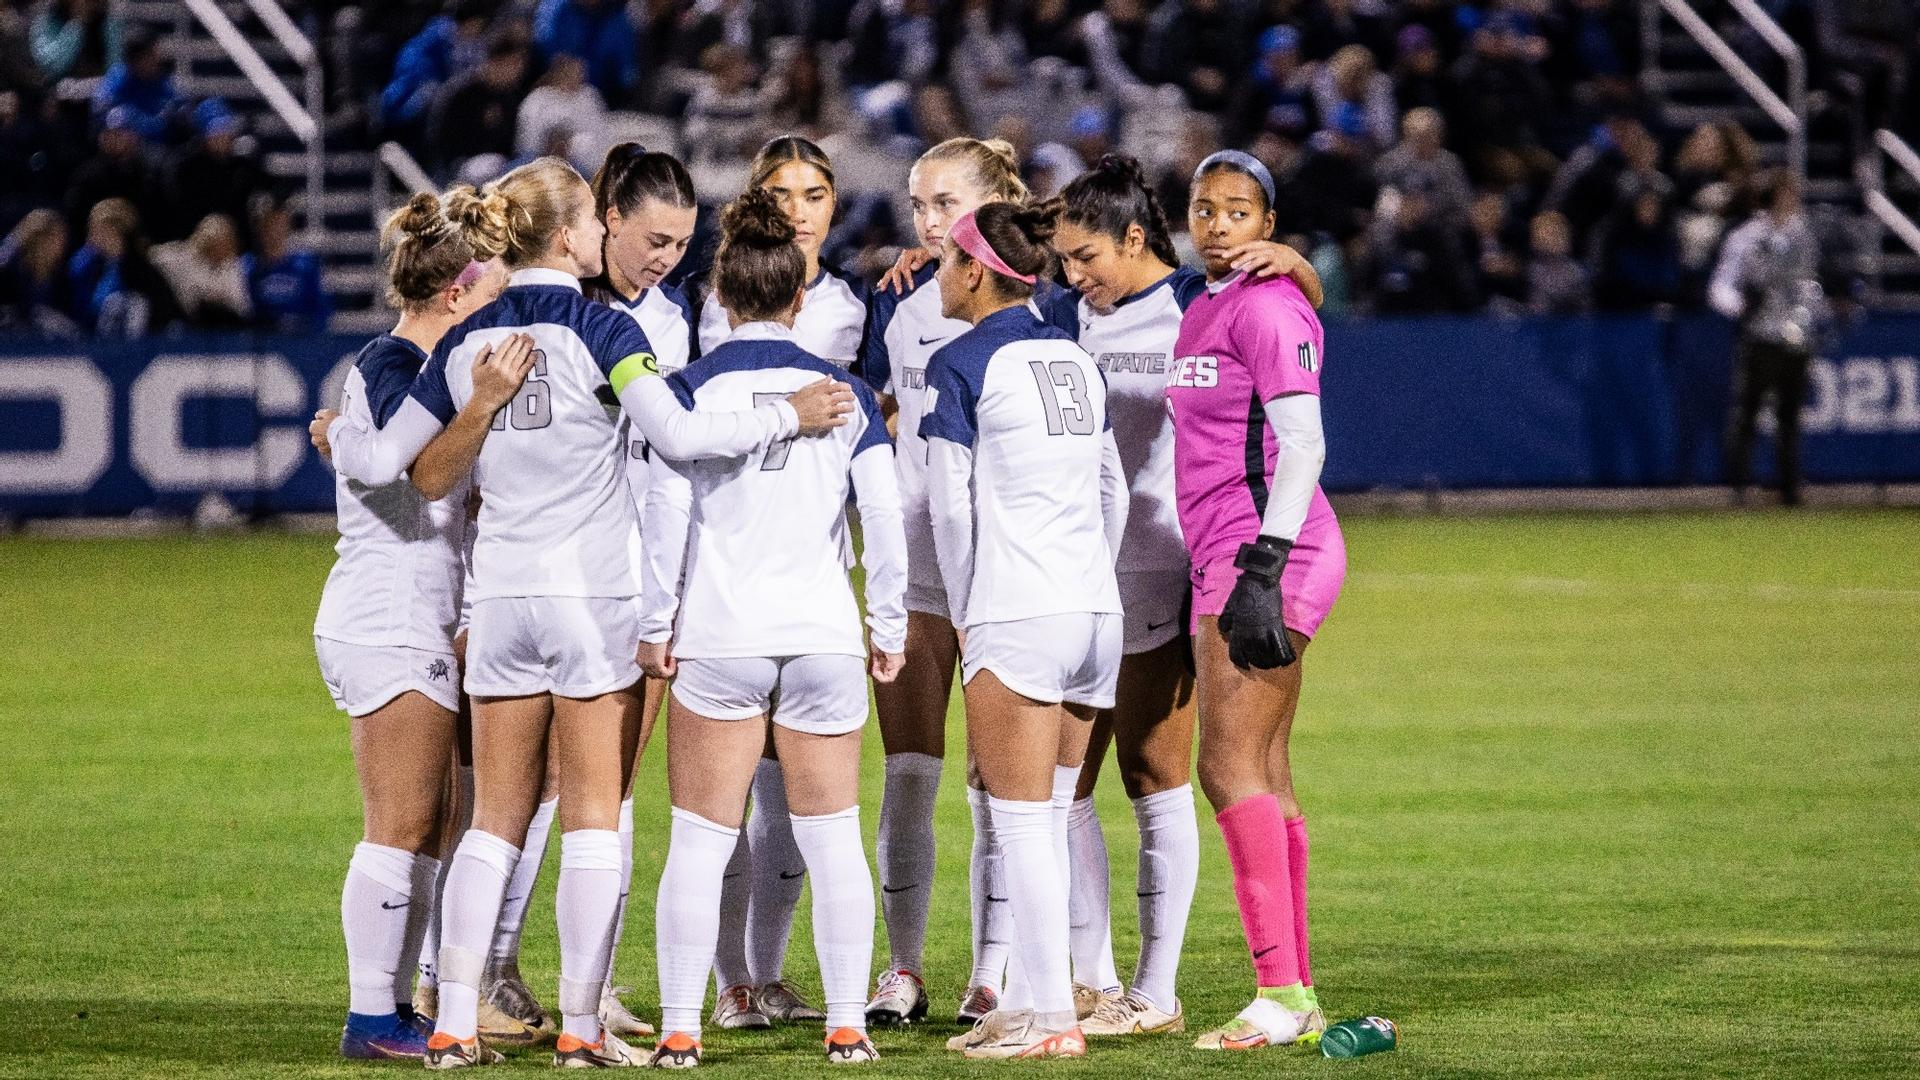 Utah State Soccer Falls to No. 1-Seed BYU in NCAA Tournament